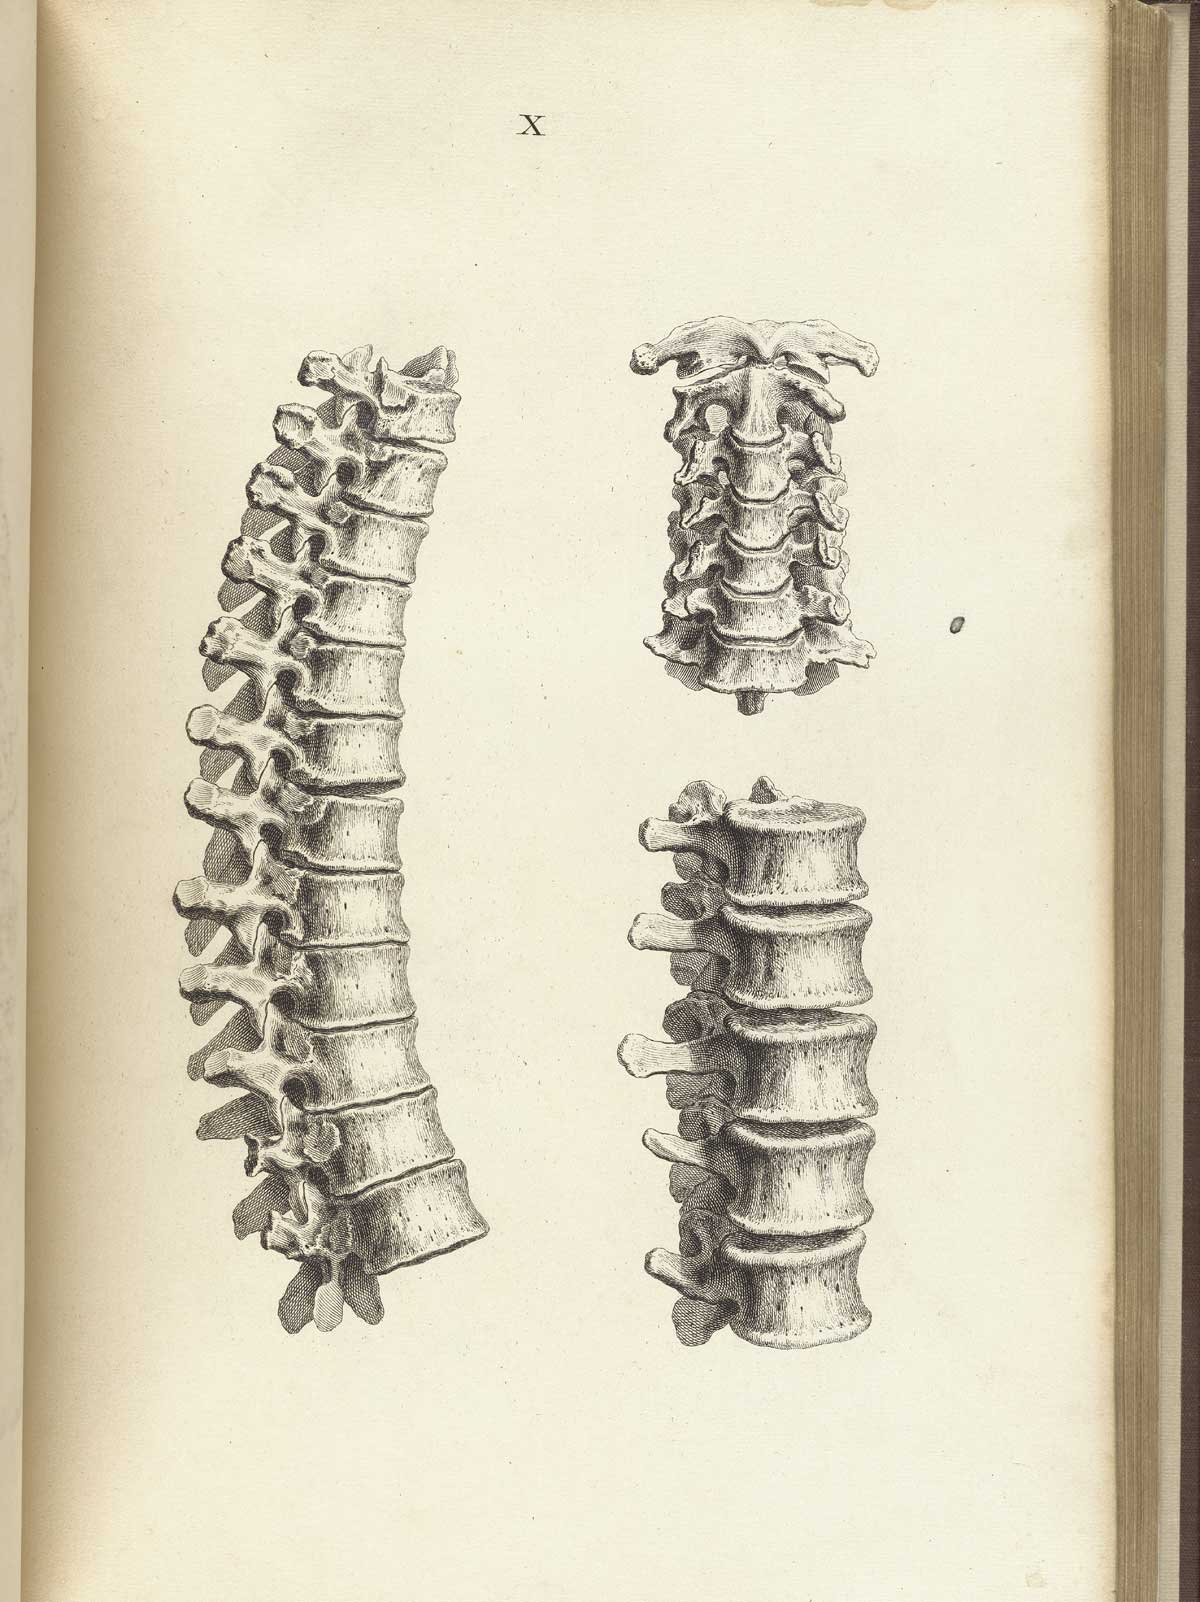 Engraving of three portions of the vertebral column: in the upper right are the seven cervical vertebrae, to the lower right the lumbar vertebrae, and along the left of the image the thoracic vertebrae, from William Cheselden’s Osteographia, NLM Call no.: WZ 260 C499o 1733.